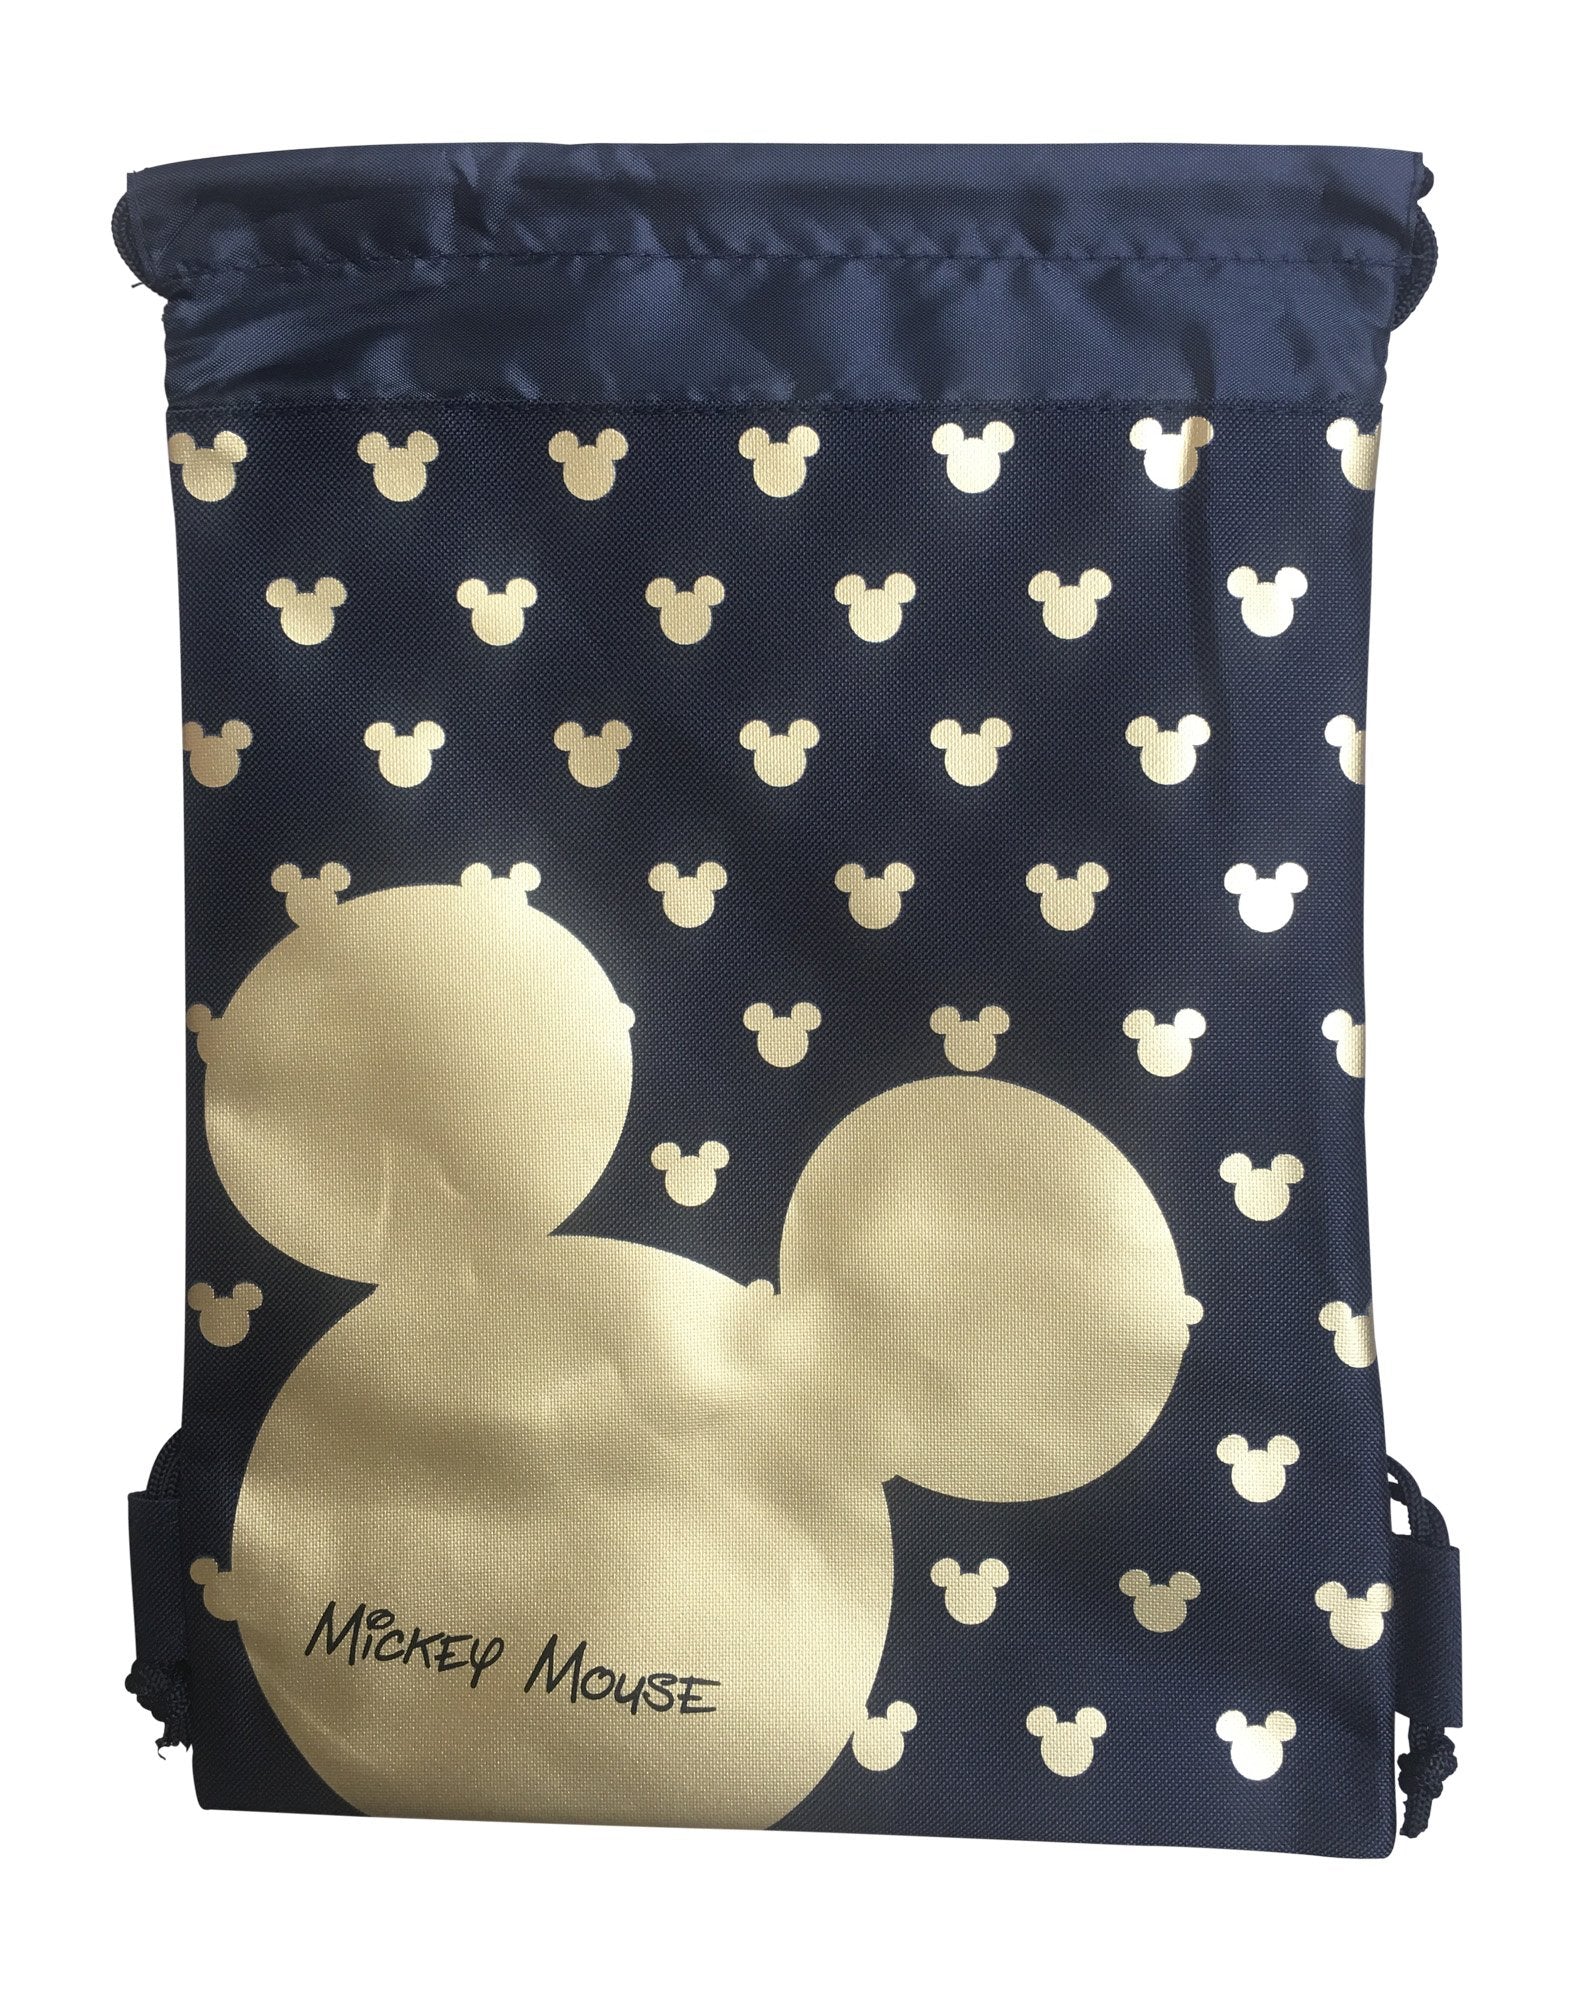 Disney Mickey Mouse Drawstring Backpack Bag Pack of 2